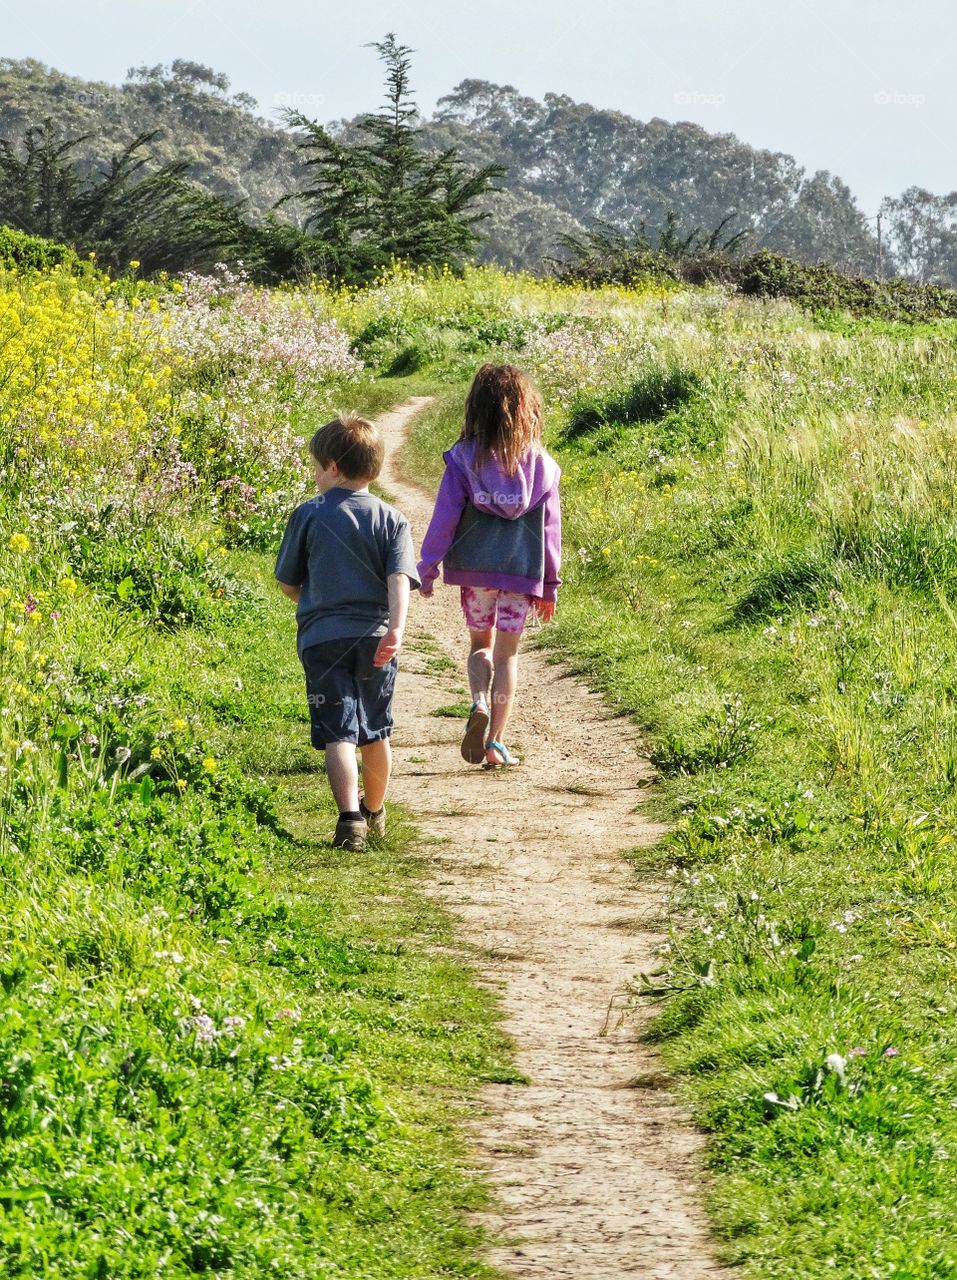 Boy And Girl Walking On A Path Of Flowers